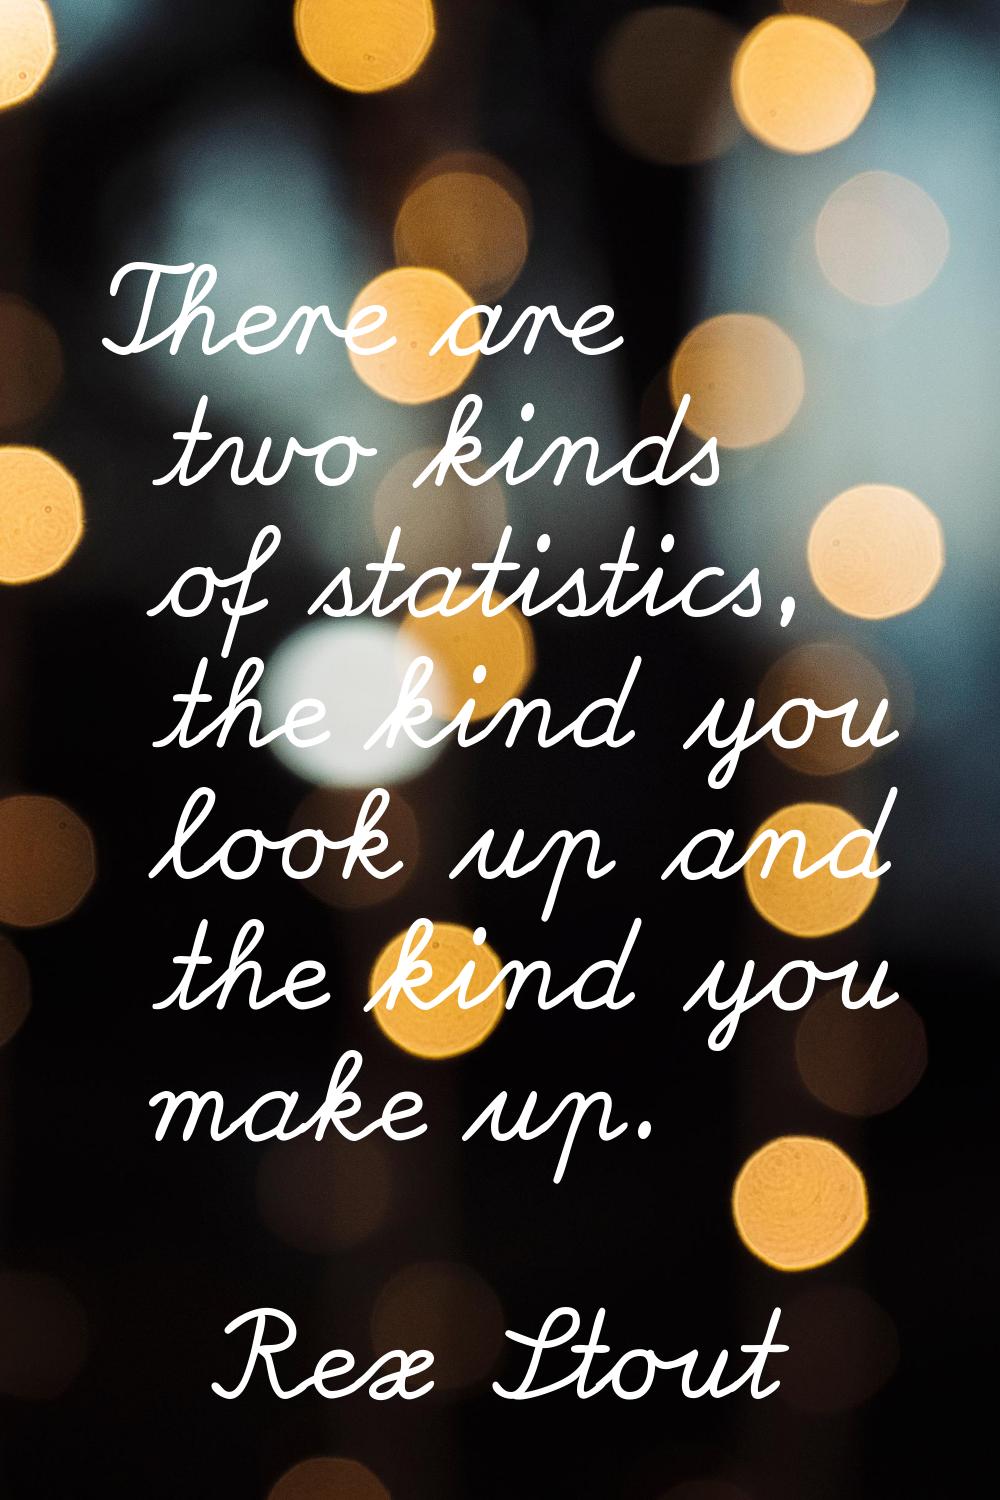 There are two kinds of statistics, the kind you look up and the kind you make up.